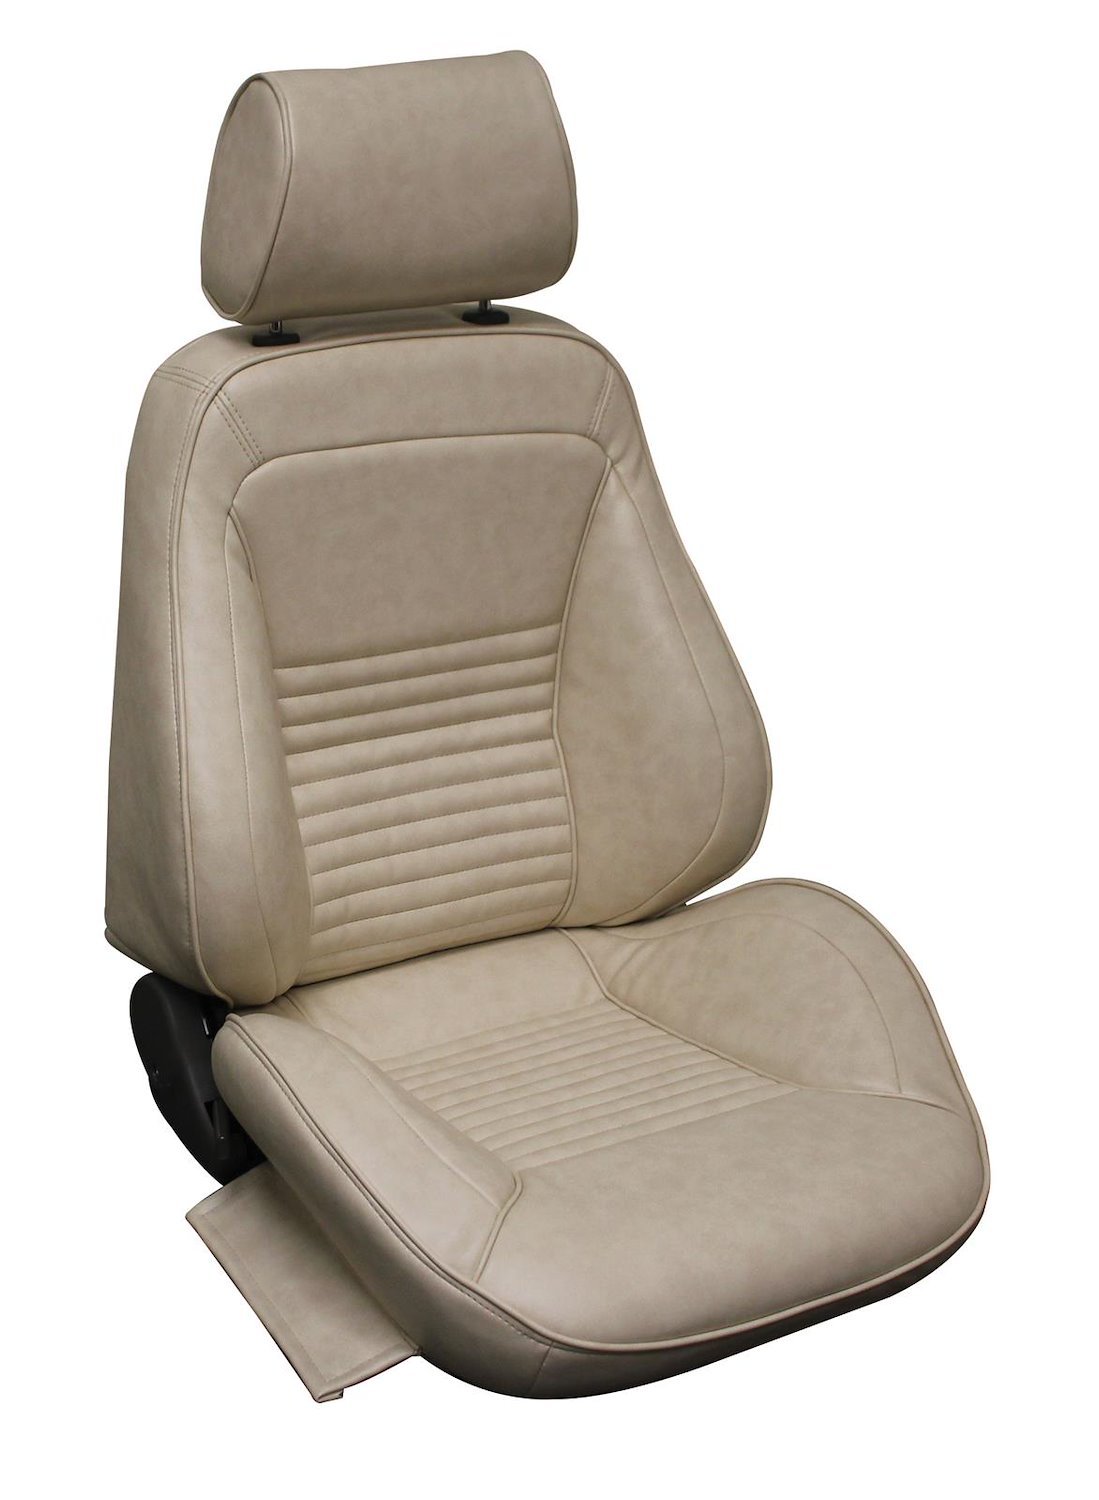 1967 Ford Mustang Standard Interior Parchment Touring II Preassembled Reclining Front Bucket Seats